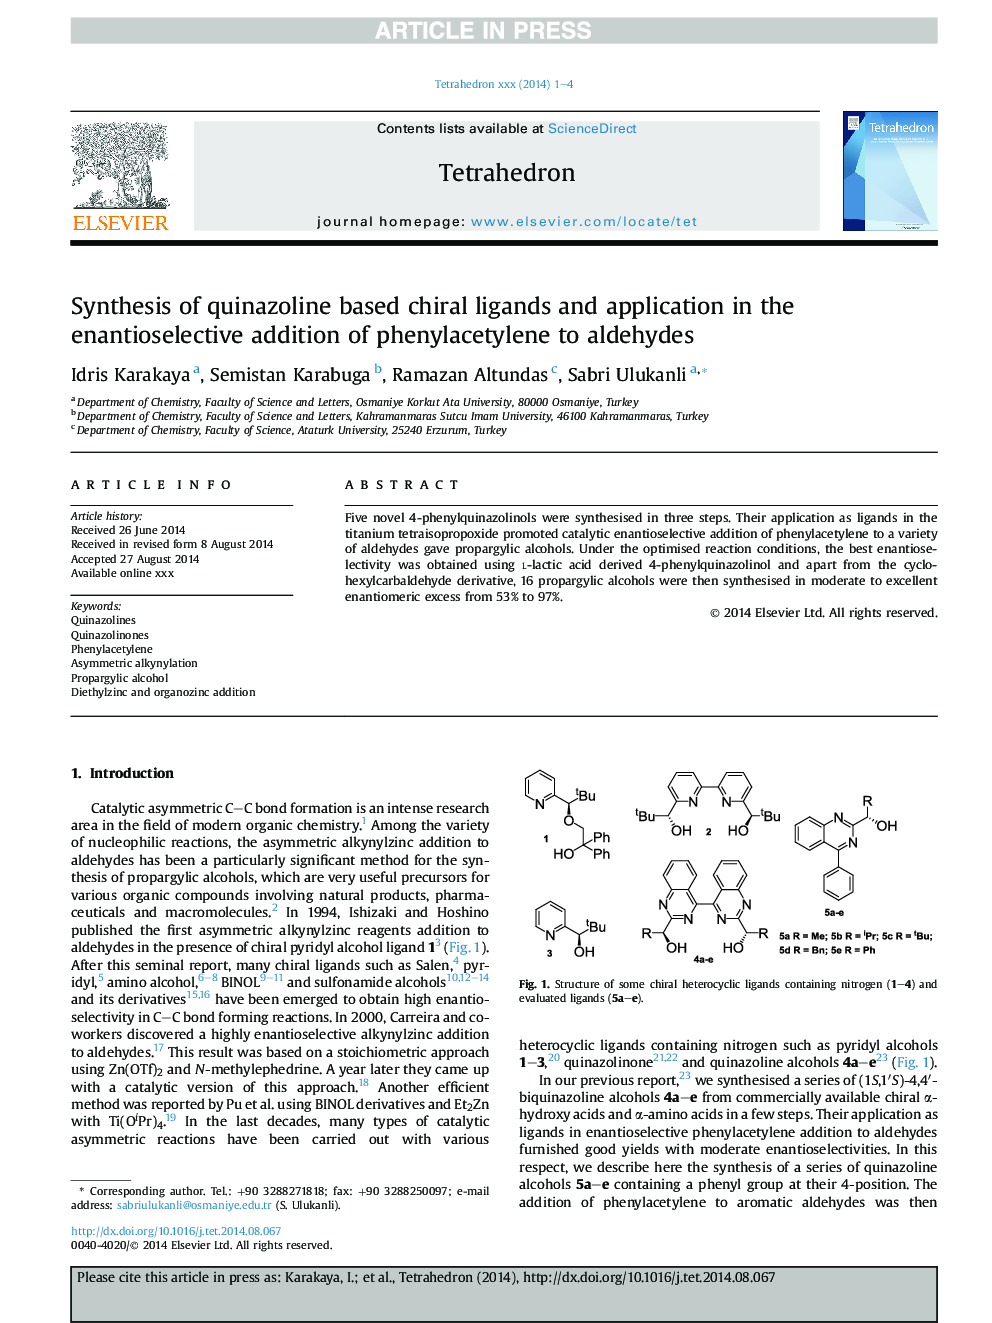 Synthesis of quinazoline based chiral ligands and application in the enantioselective addition of phenylacetylene to aldehydes